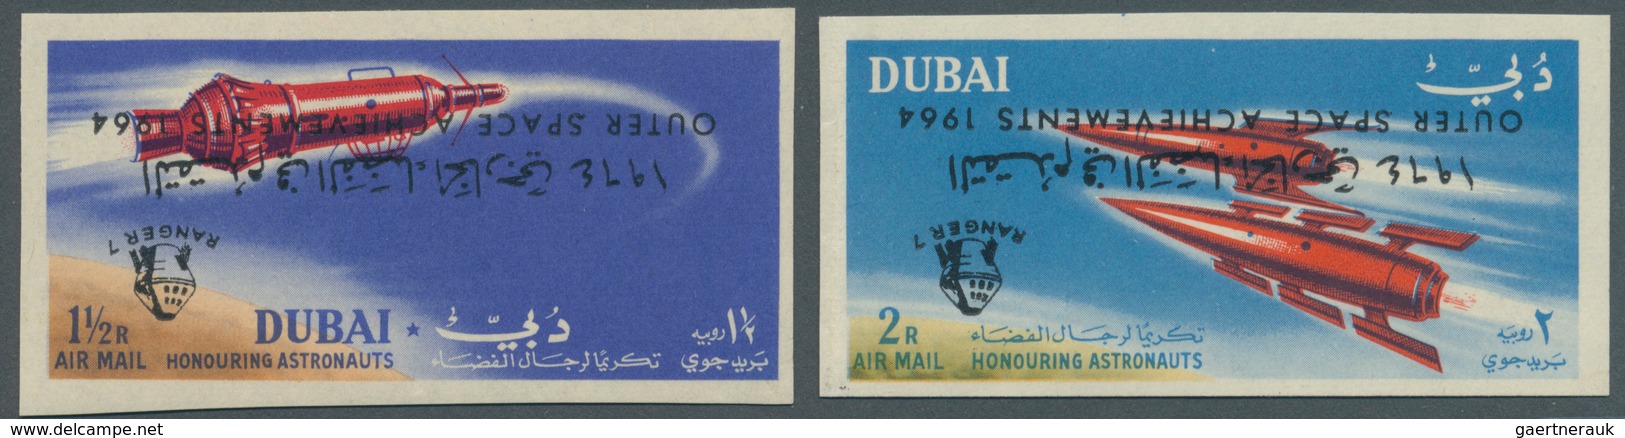 08395 Dubai: 1964, Ranger 7 / Outer Space Achievements, 1np. To 2r. Imperforate, Complete Set Of Eight Val - Dubai